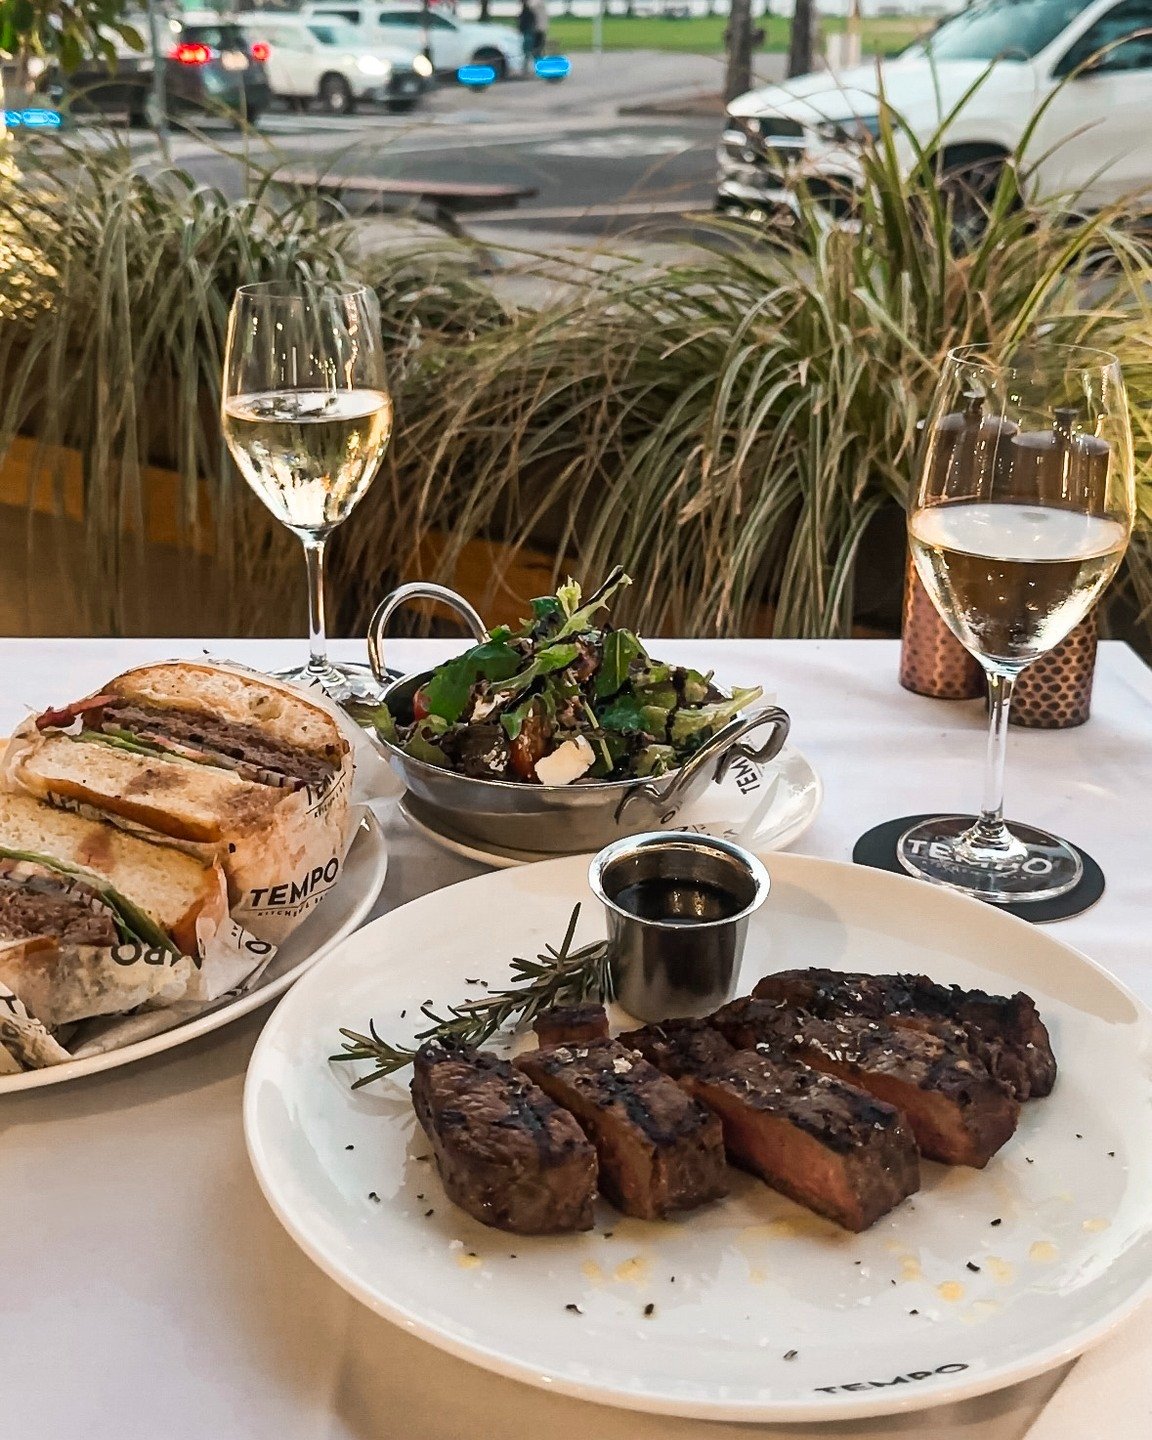 Introducing Steak Night Mondays at Tempo! 

Starting tonight, indulge in 200g of our featured weekly steak, served with fries, salad, and your choice of truffle butter or mustard&mdash;all for just $32.

Your Mondays just got that much better&mdash;r